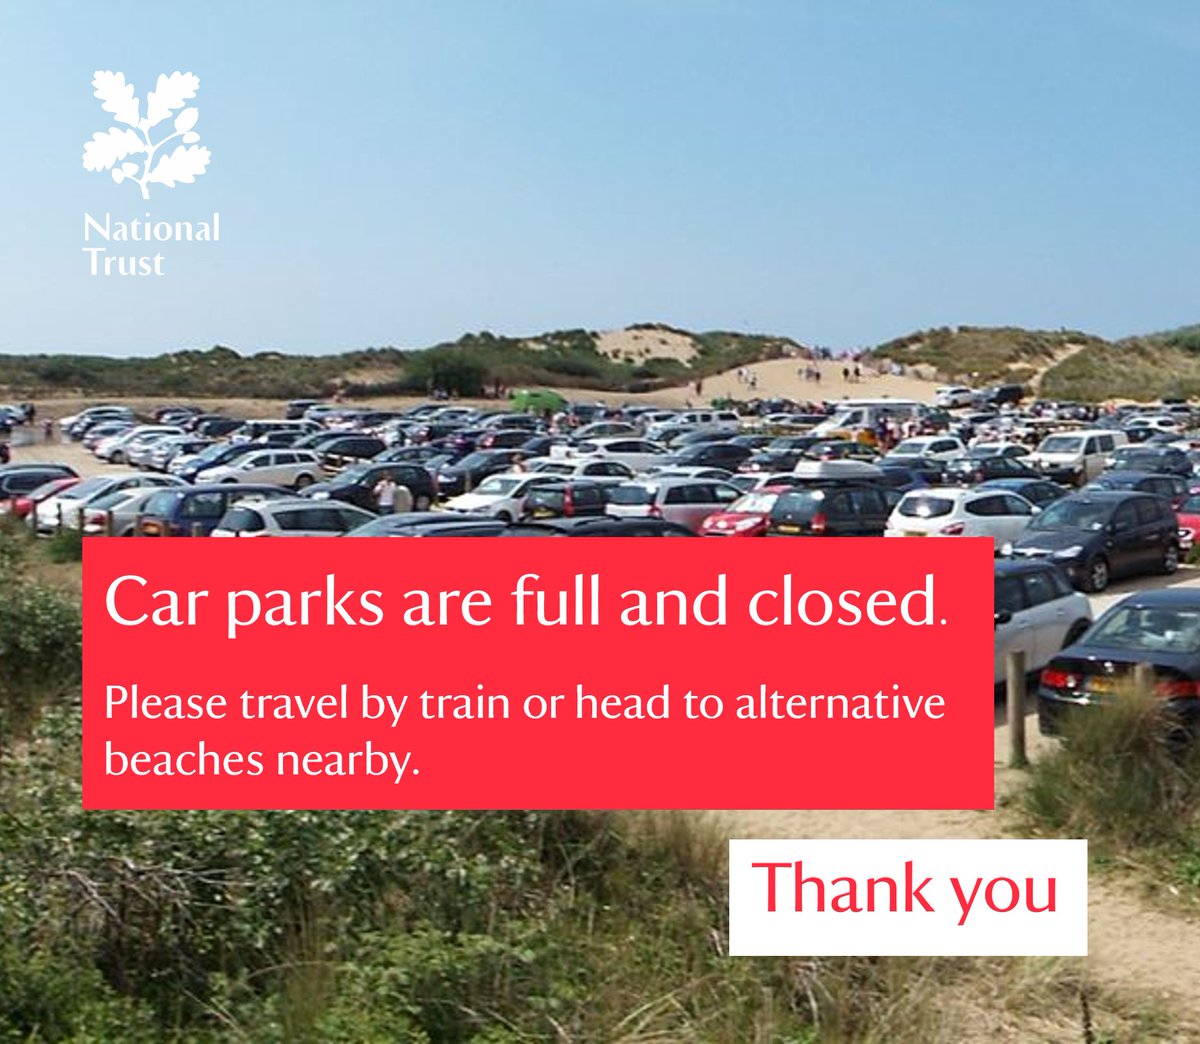 Both car parks are full and closed for the rest of the day. Please travel by train or head to alternative beaches nearby. 🚆 Plan your train journey here bit.ly/41KRd85 🏖 Sefton beaches bit.ly/3PJfBBC 🏖 Wirral beaches bit.ly/3PInB5Q Thank you.